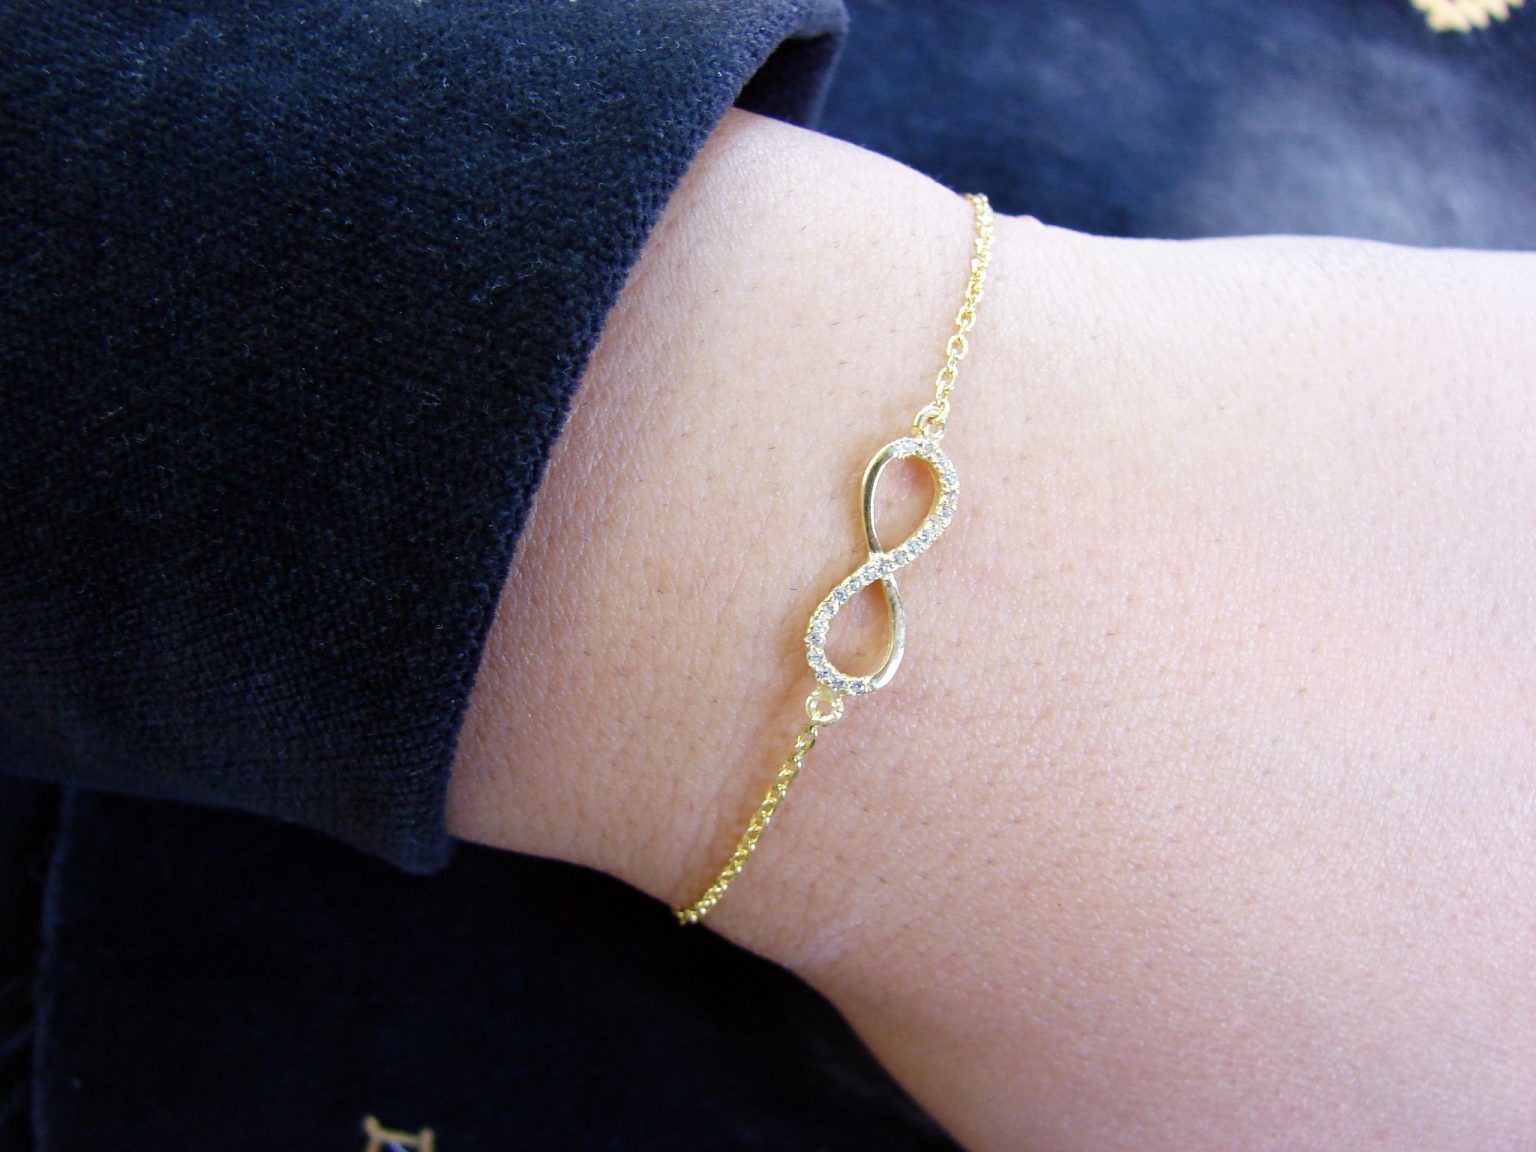 Bracelet Infinity Gold Plated Sterling Silver 925, Delicate Chain and Cross